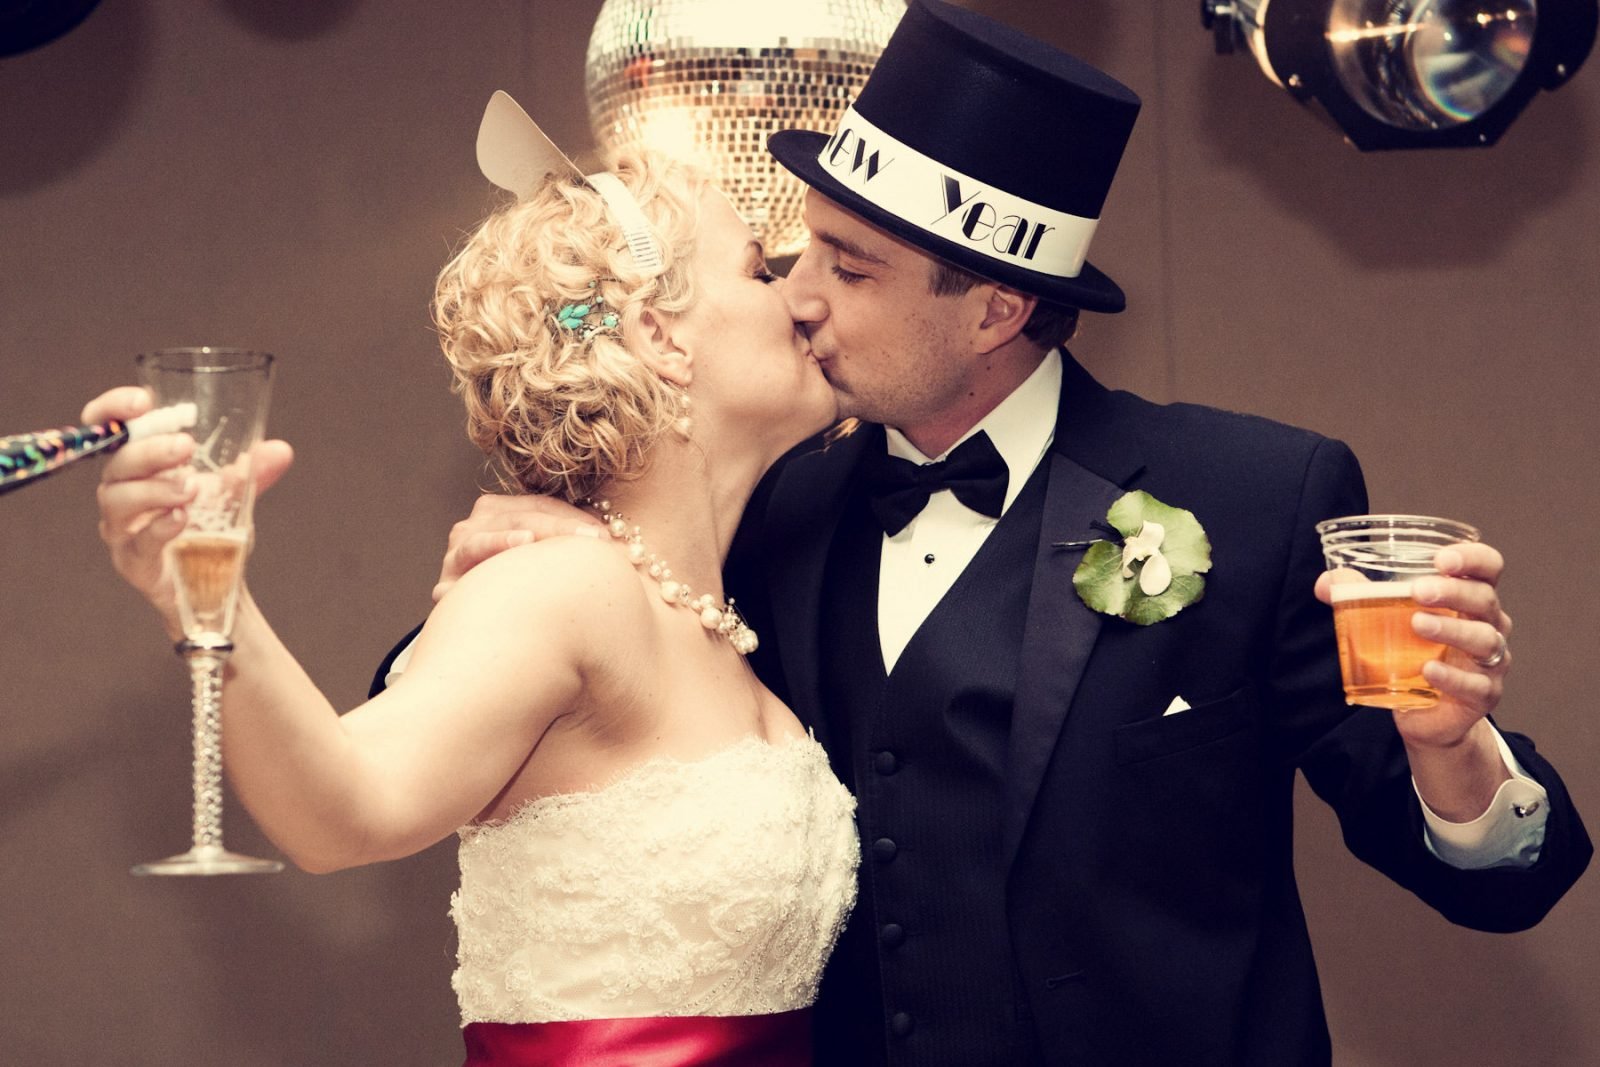 Romantic Kiss for New Years Eve Party Vintage